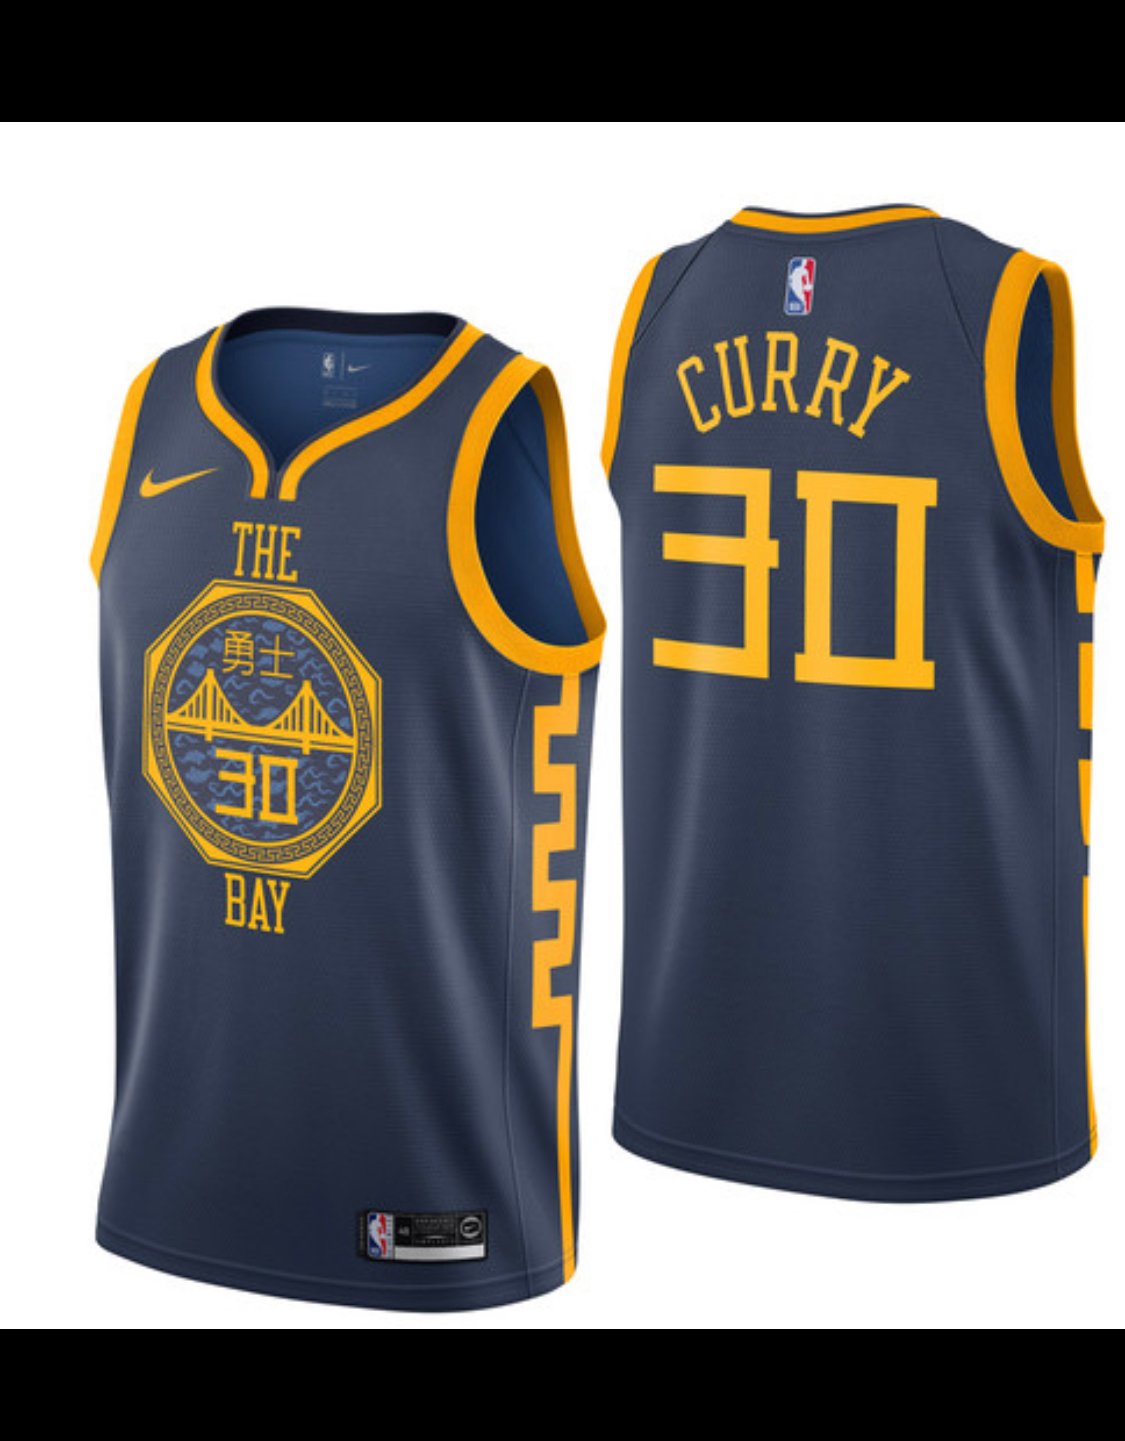 Curry golden state warriors city edition